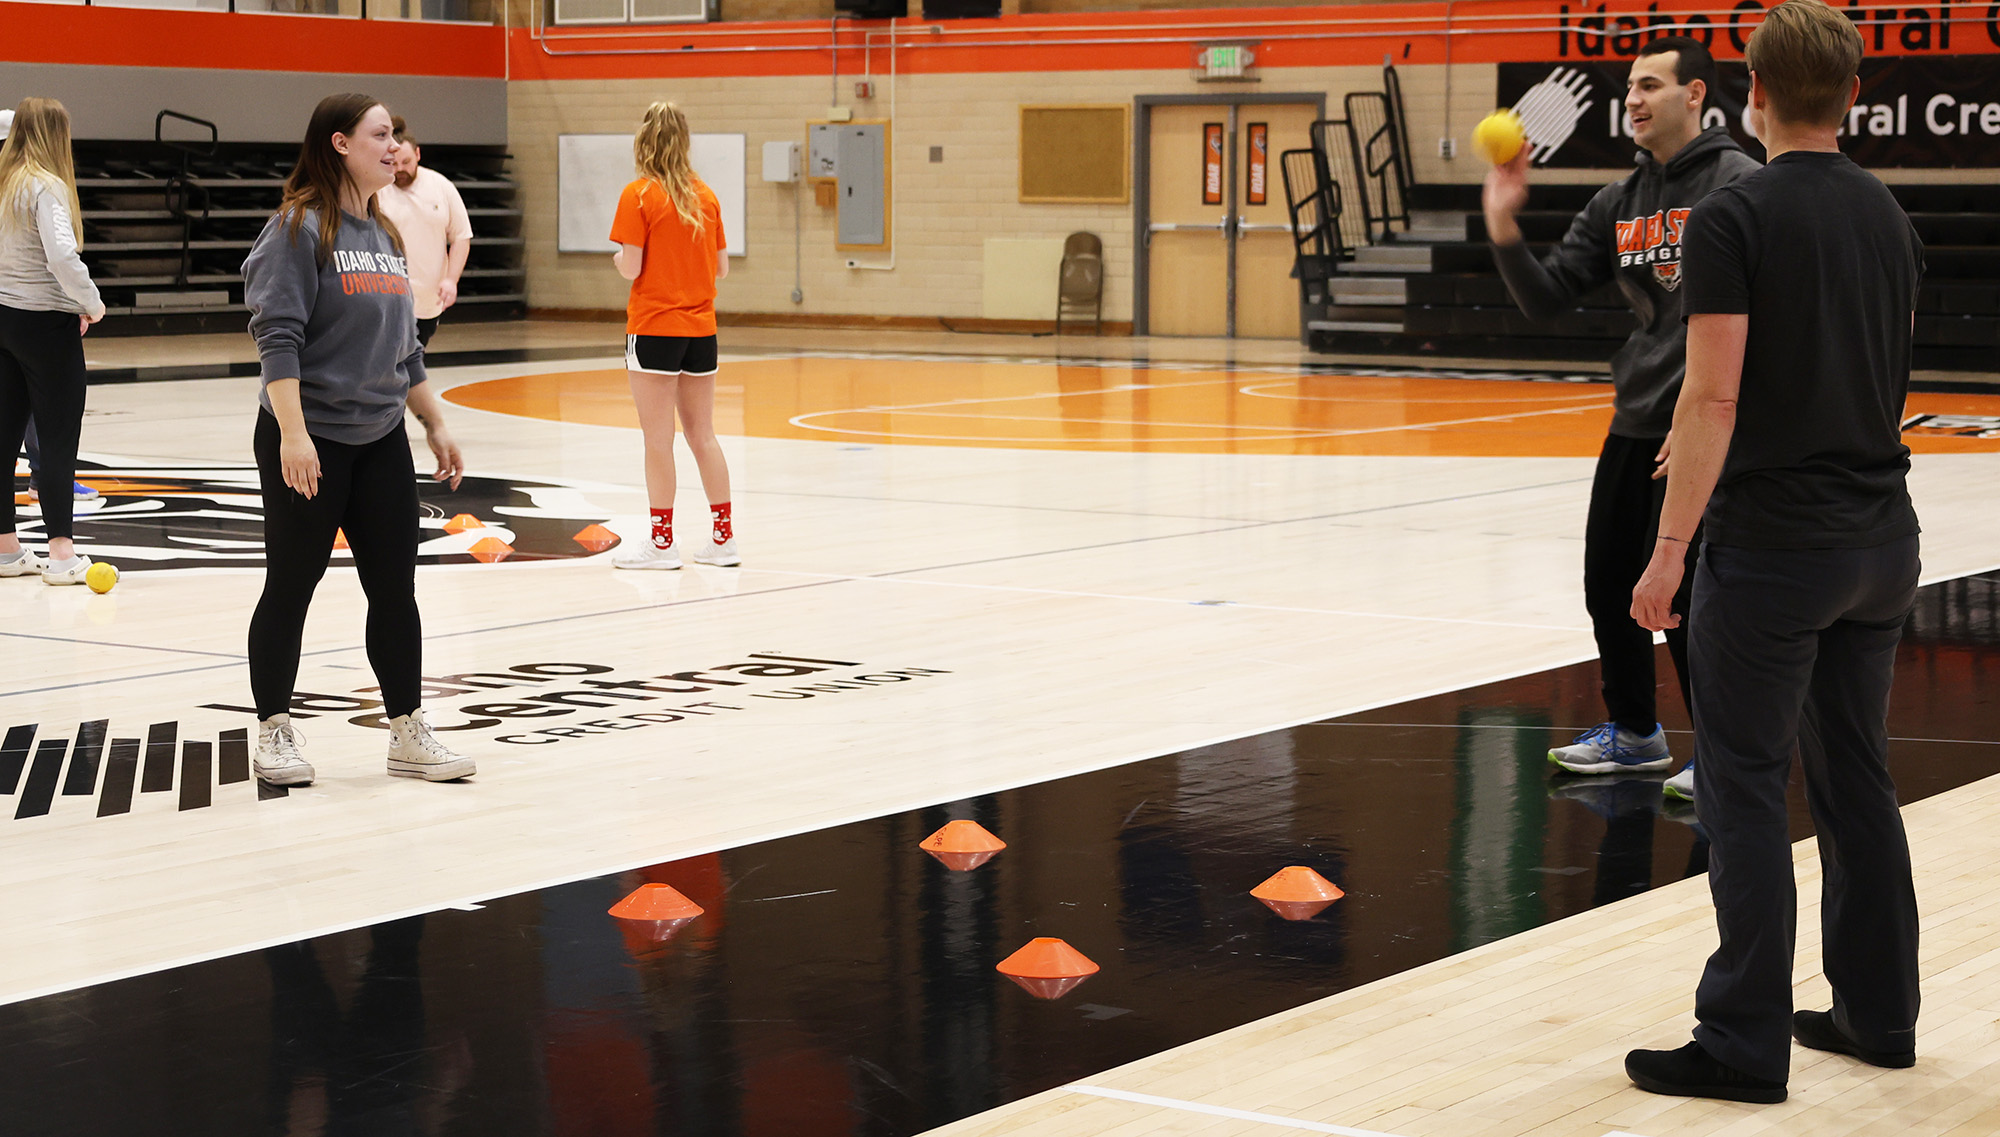 Idaho State University Physical Education Students learn hands-on skills in class.